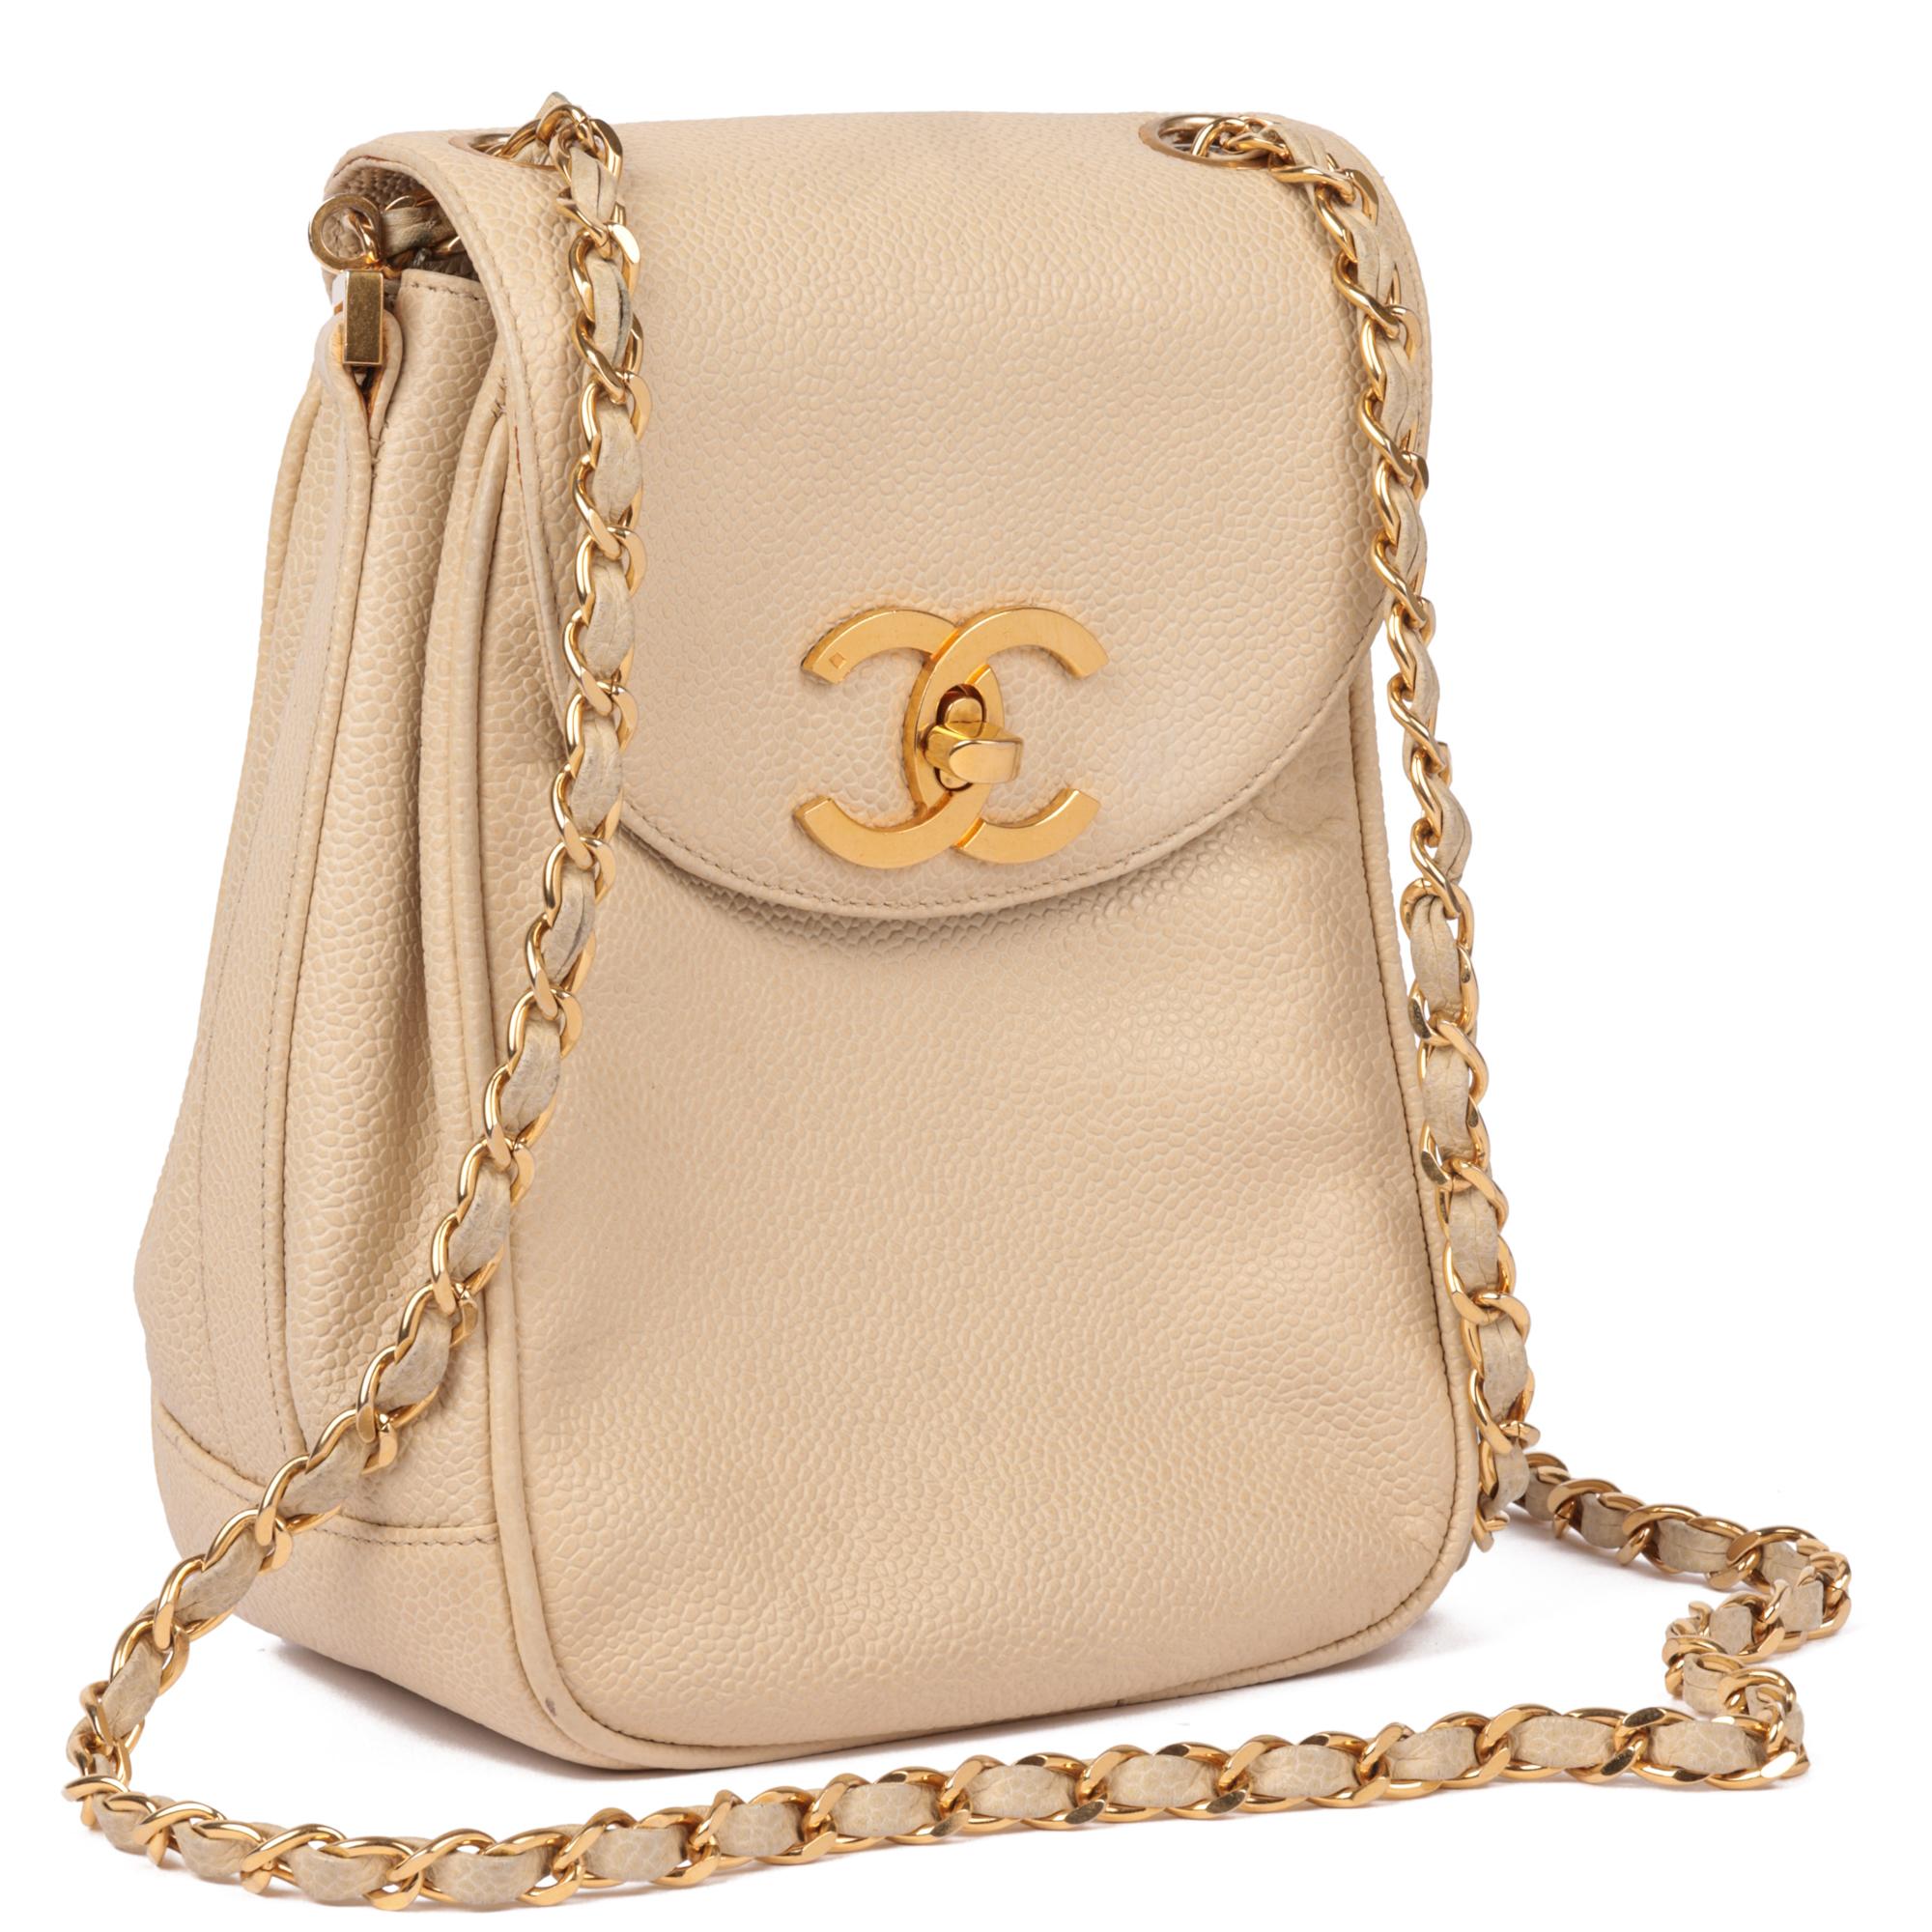 CHANEL
Beige Caviar Leather Vintage XL Classic Single Flap Bag 

Xupes Reference: HB5217
Serial Number: 3447135
Age (Circa): 1994
Accompanied By: Chanel Dust Bag, Authenticity Card
Authenticity Details: Authenticity Card, Serial Sticker (Made in